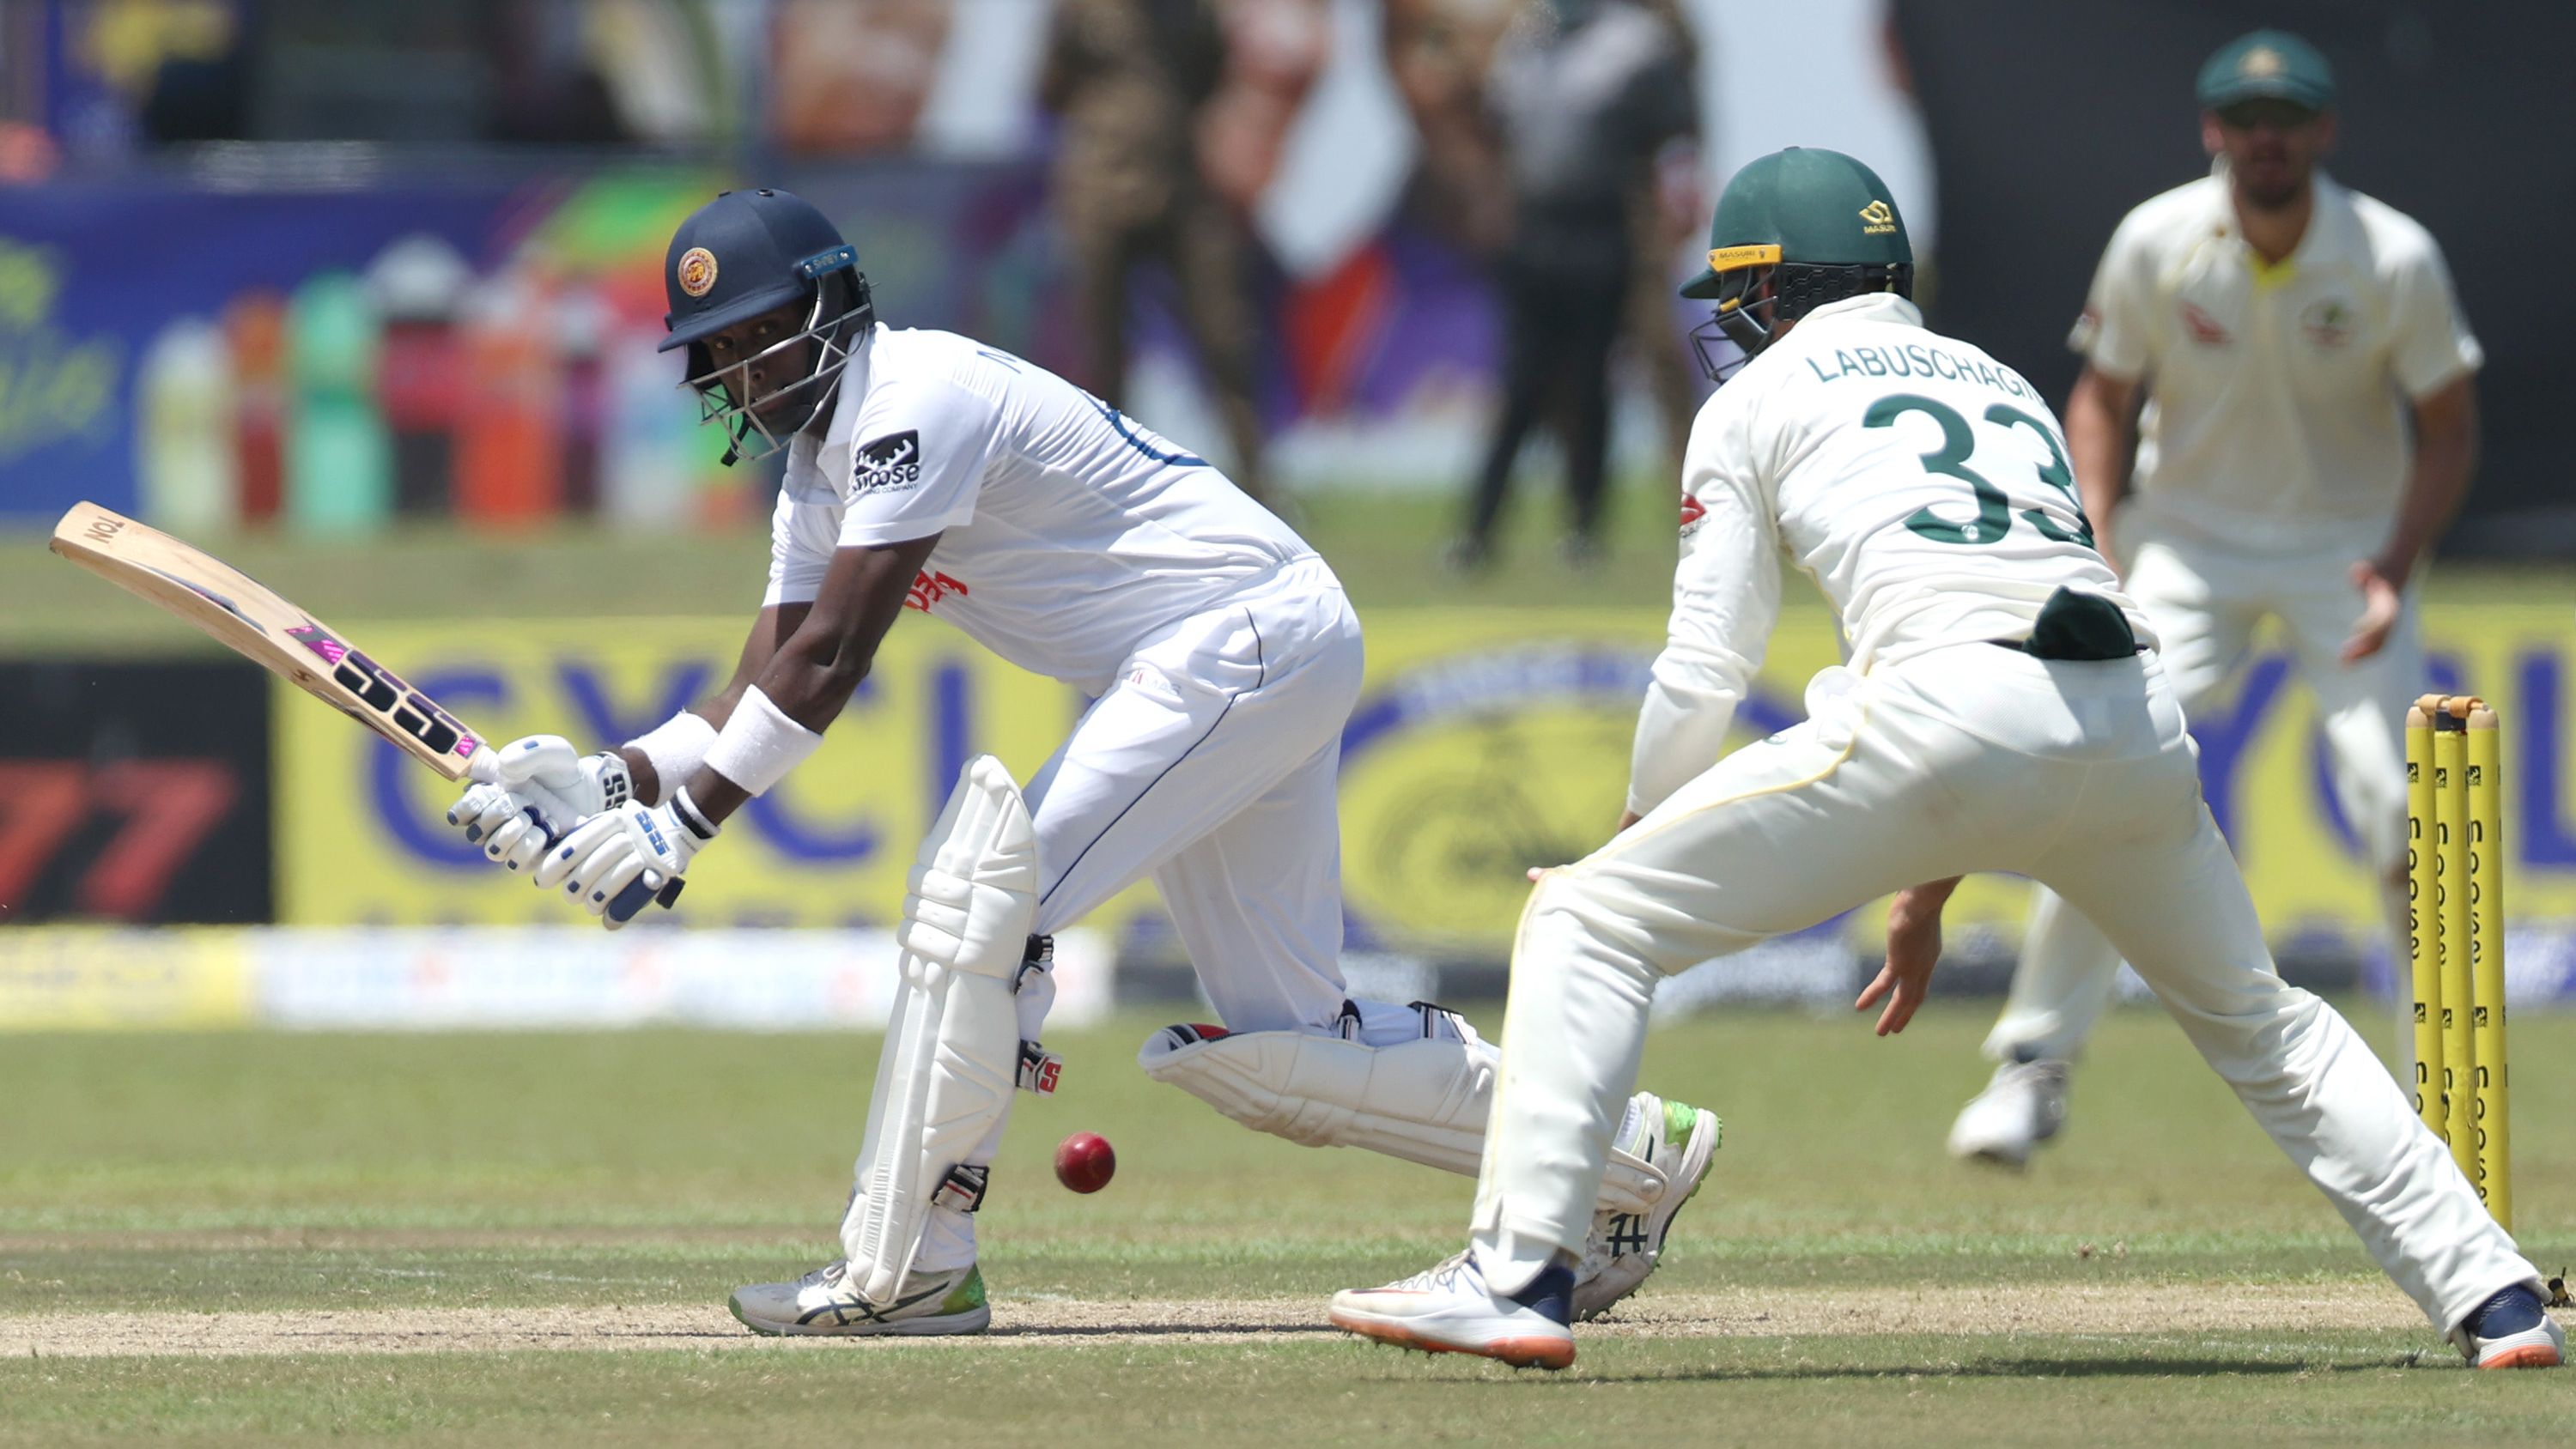 Sri Lanka's Angelo Mathews out of first Test with COVID-19